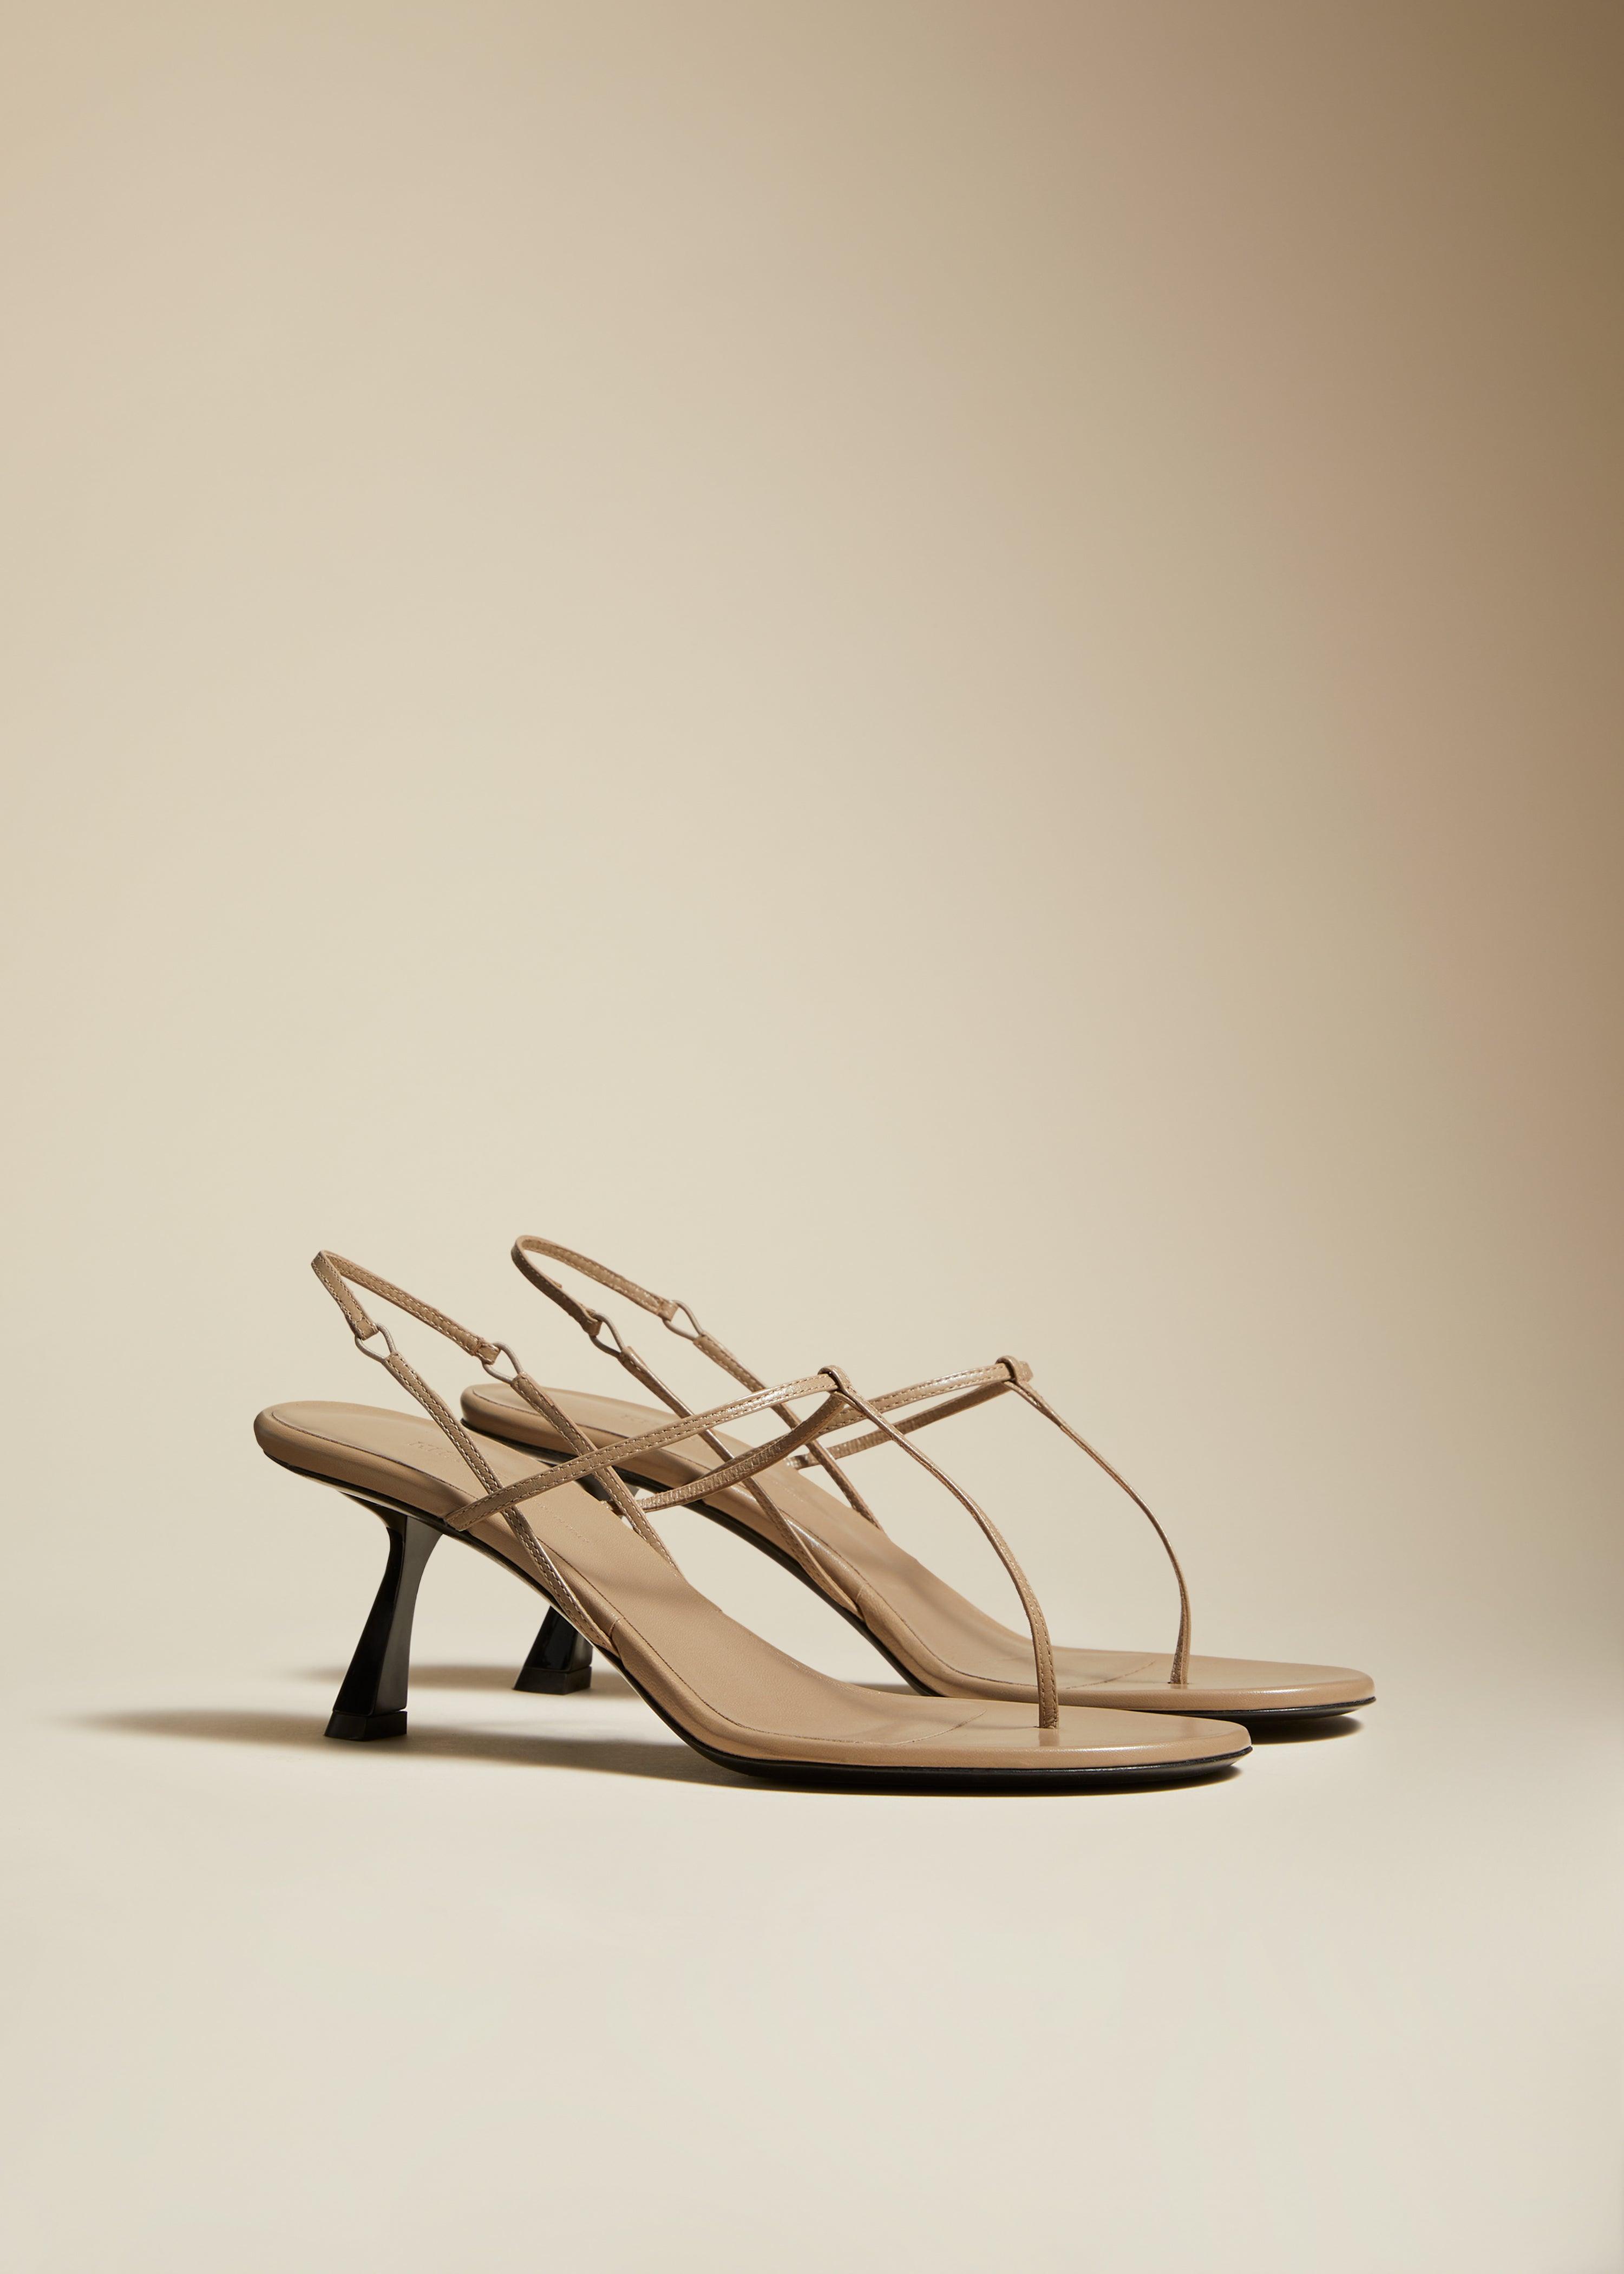 The Linden Sandal in Khaki Leather - The Iconic Issue